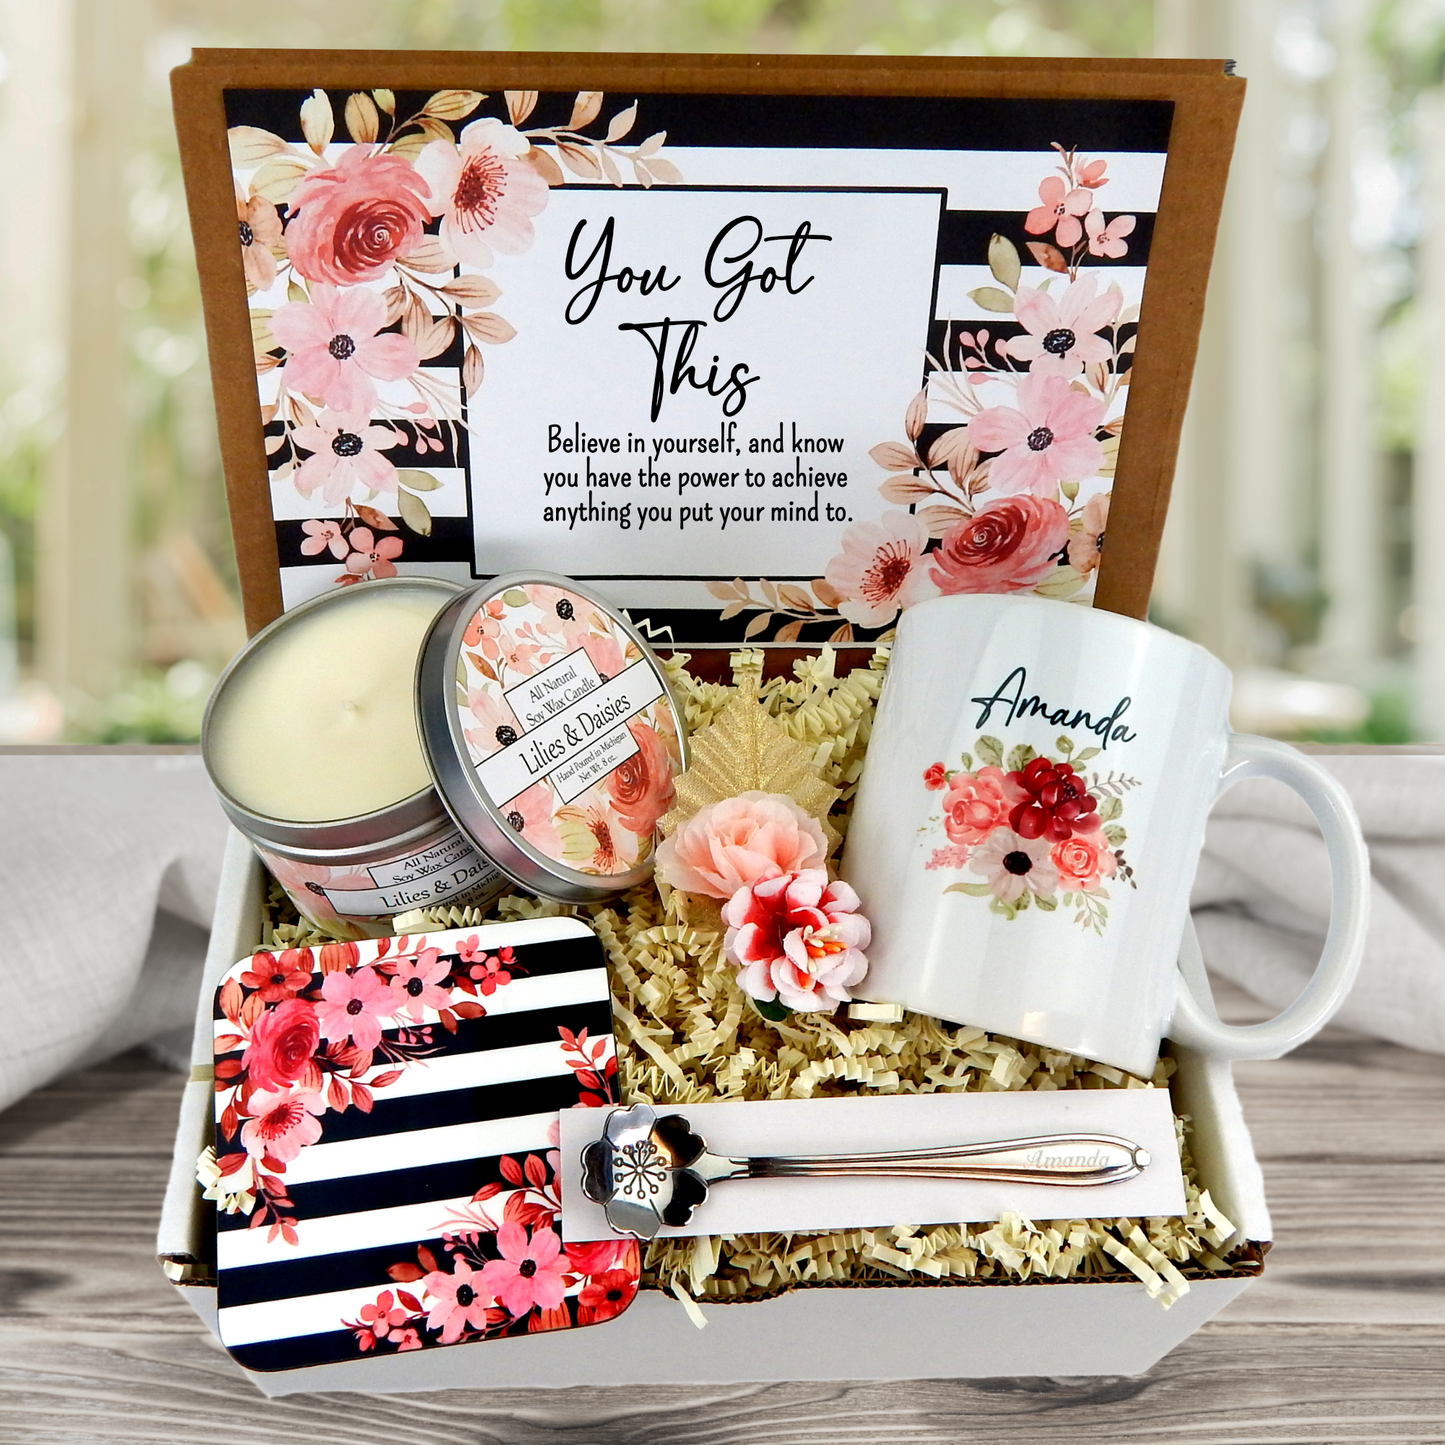 "Motivational gift with personalized messages of encouragement